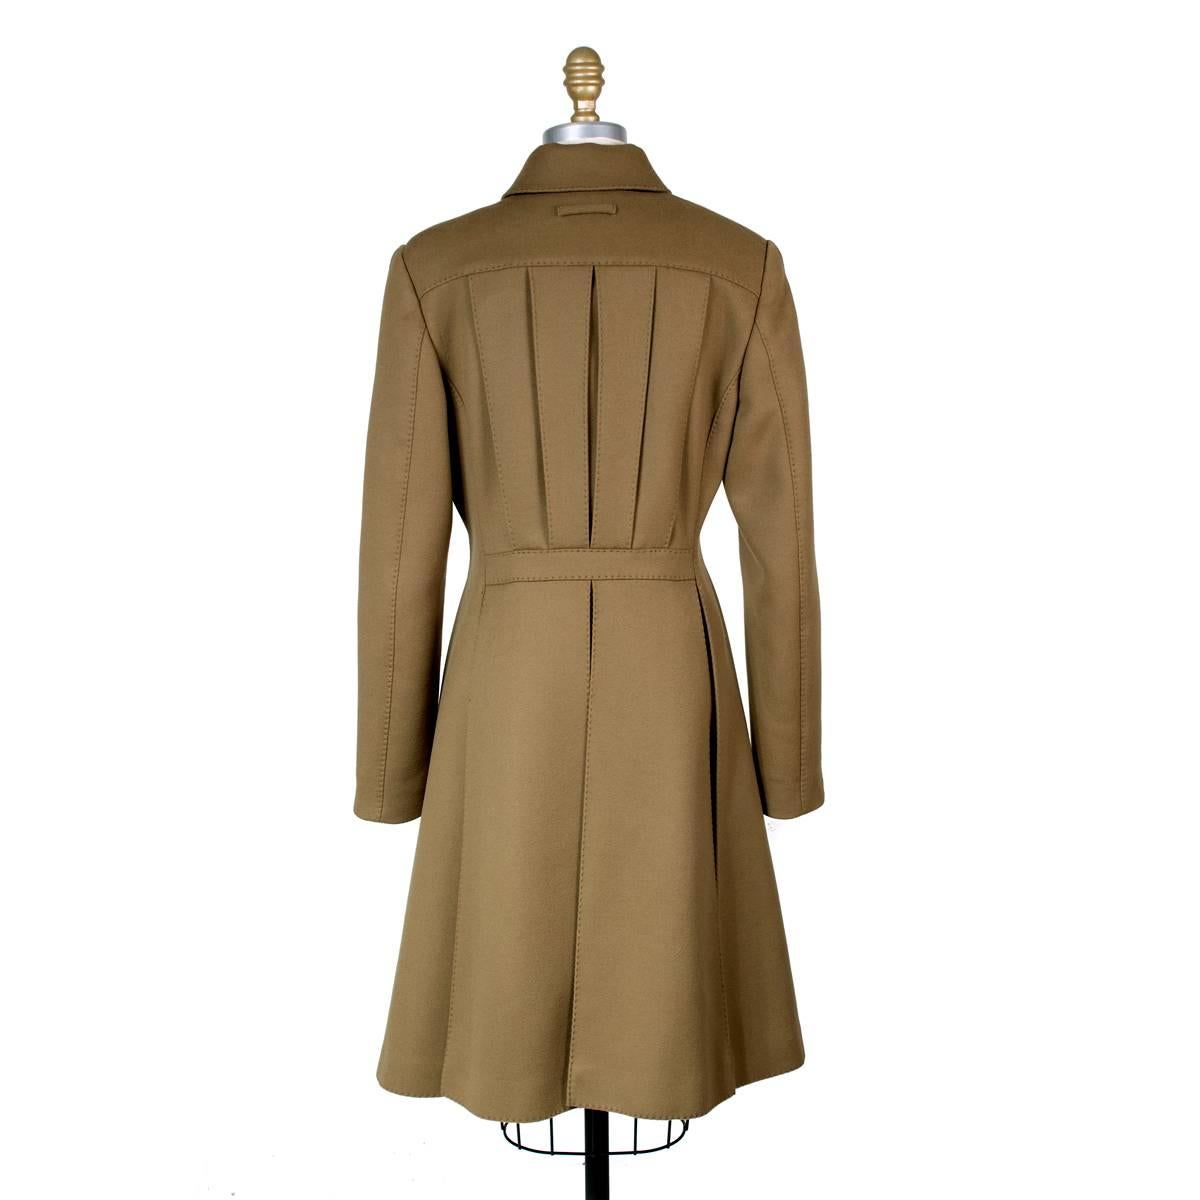 This is a trench coat by Jean Paul Gaultier.  It is made from a olive green brown wool cashmere and features slit pockets in front lined in black leather.  Snap buttons closure in front and lined in satin.

17